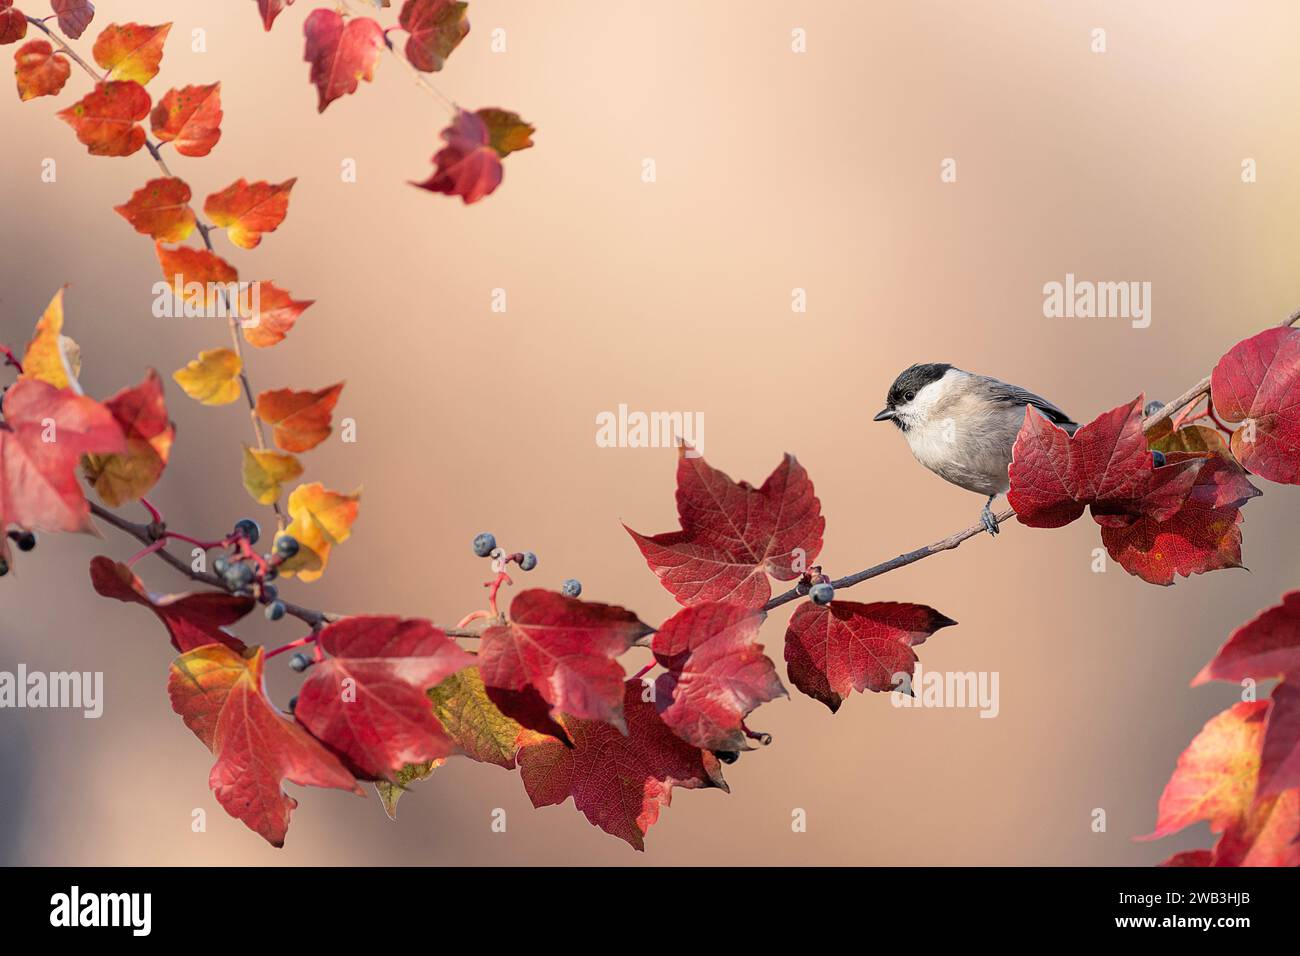 Among the autumn leaves, the marsh tit perched on grape ivy (Poecile palustris on Parthenocissus tricuspidata) Stock Photo